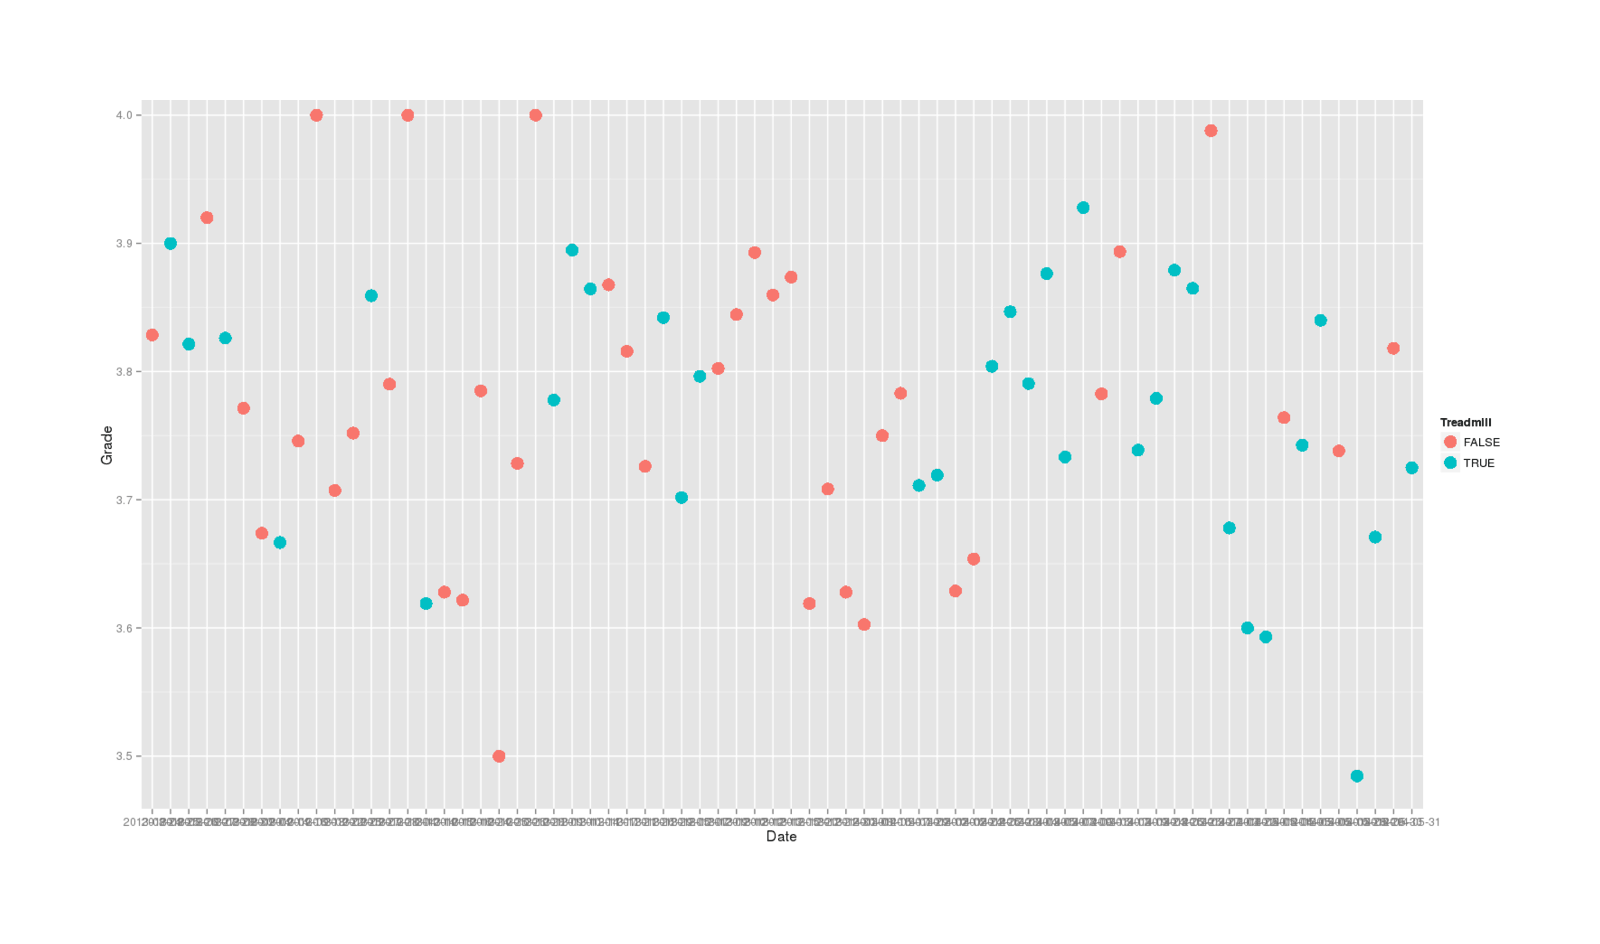 Mnemosyne spaced-repetition flashcard reviews, averaged by day, colored by whether reviewed while using a walking treadmill or not